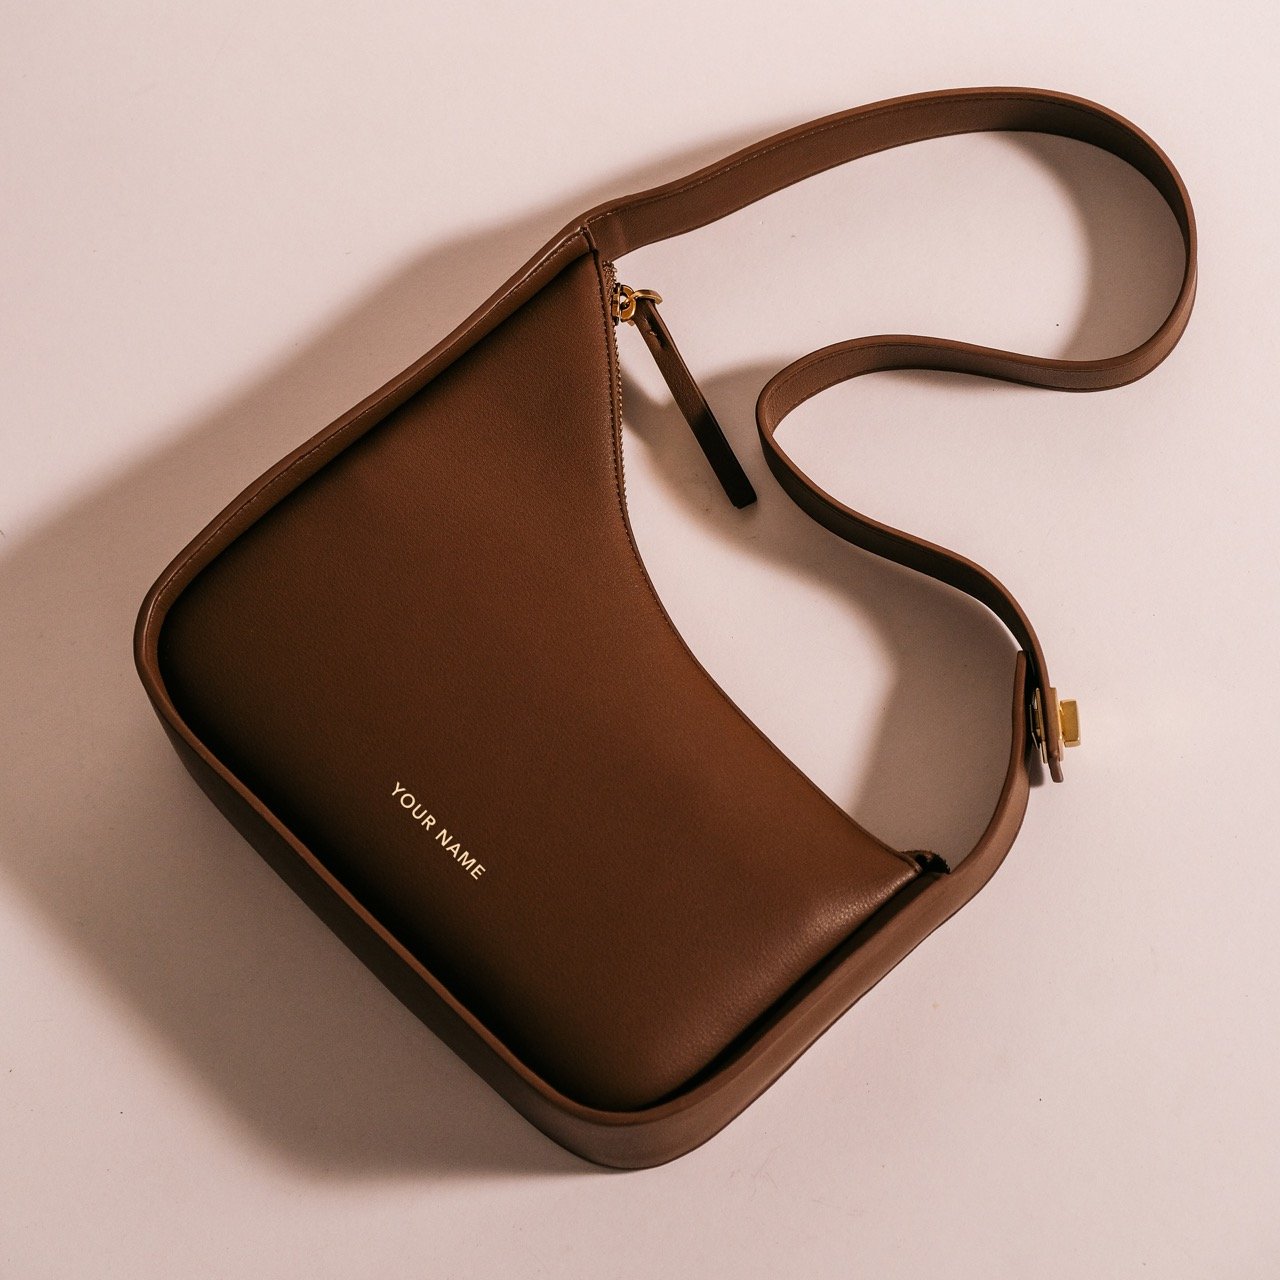 A closer look at your Felix bag. Launching this Friday at 11am only at www. ChristyNg.com #christyngbag, By ChristyNg.com